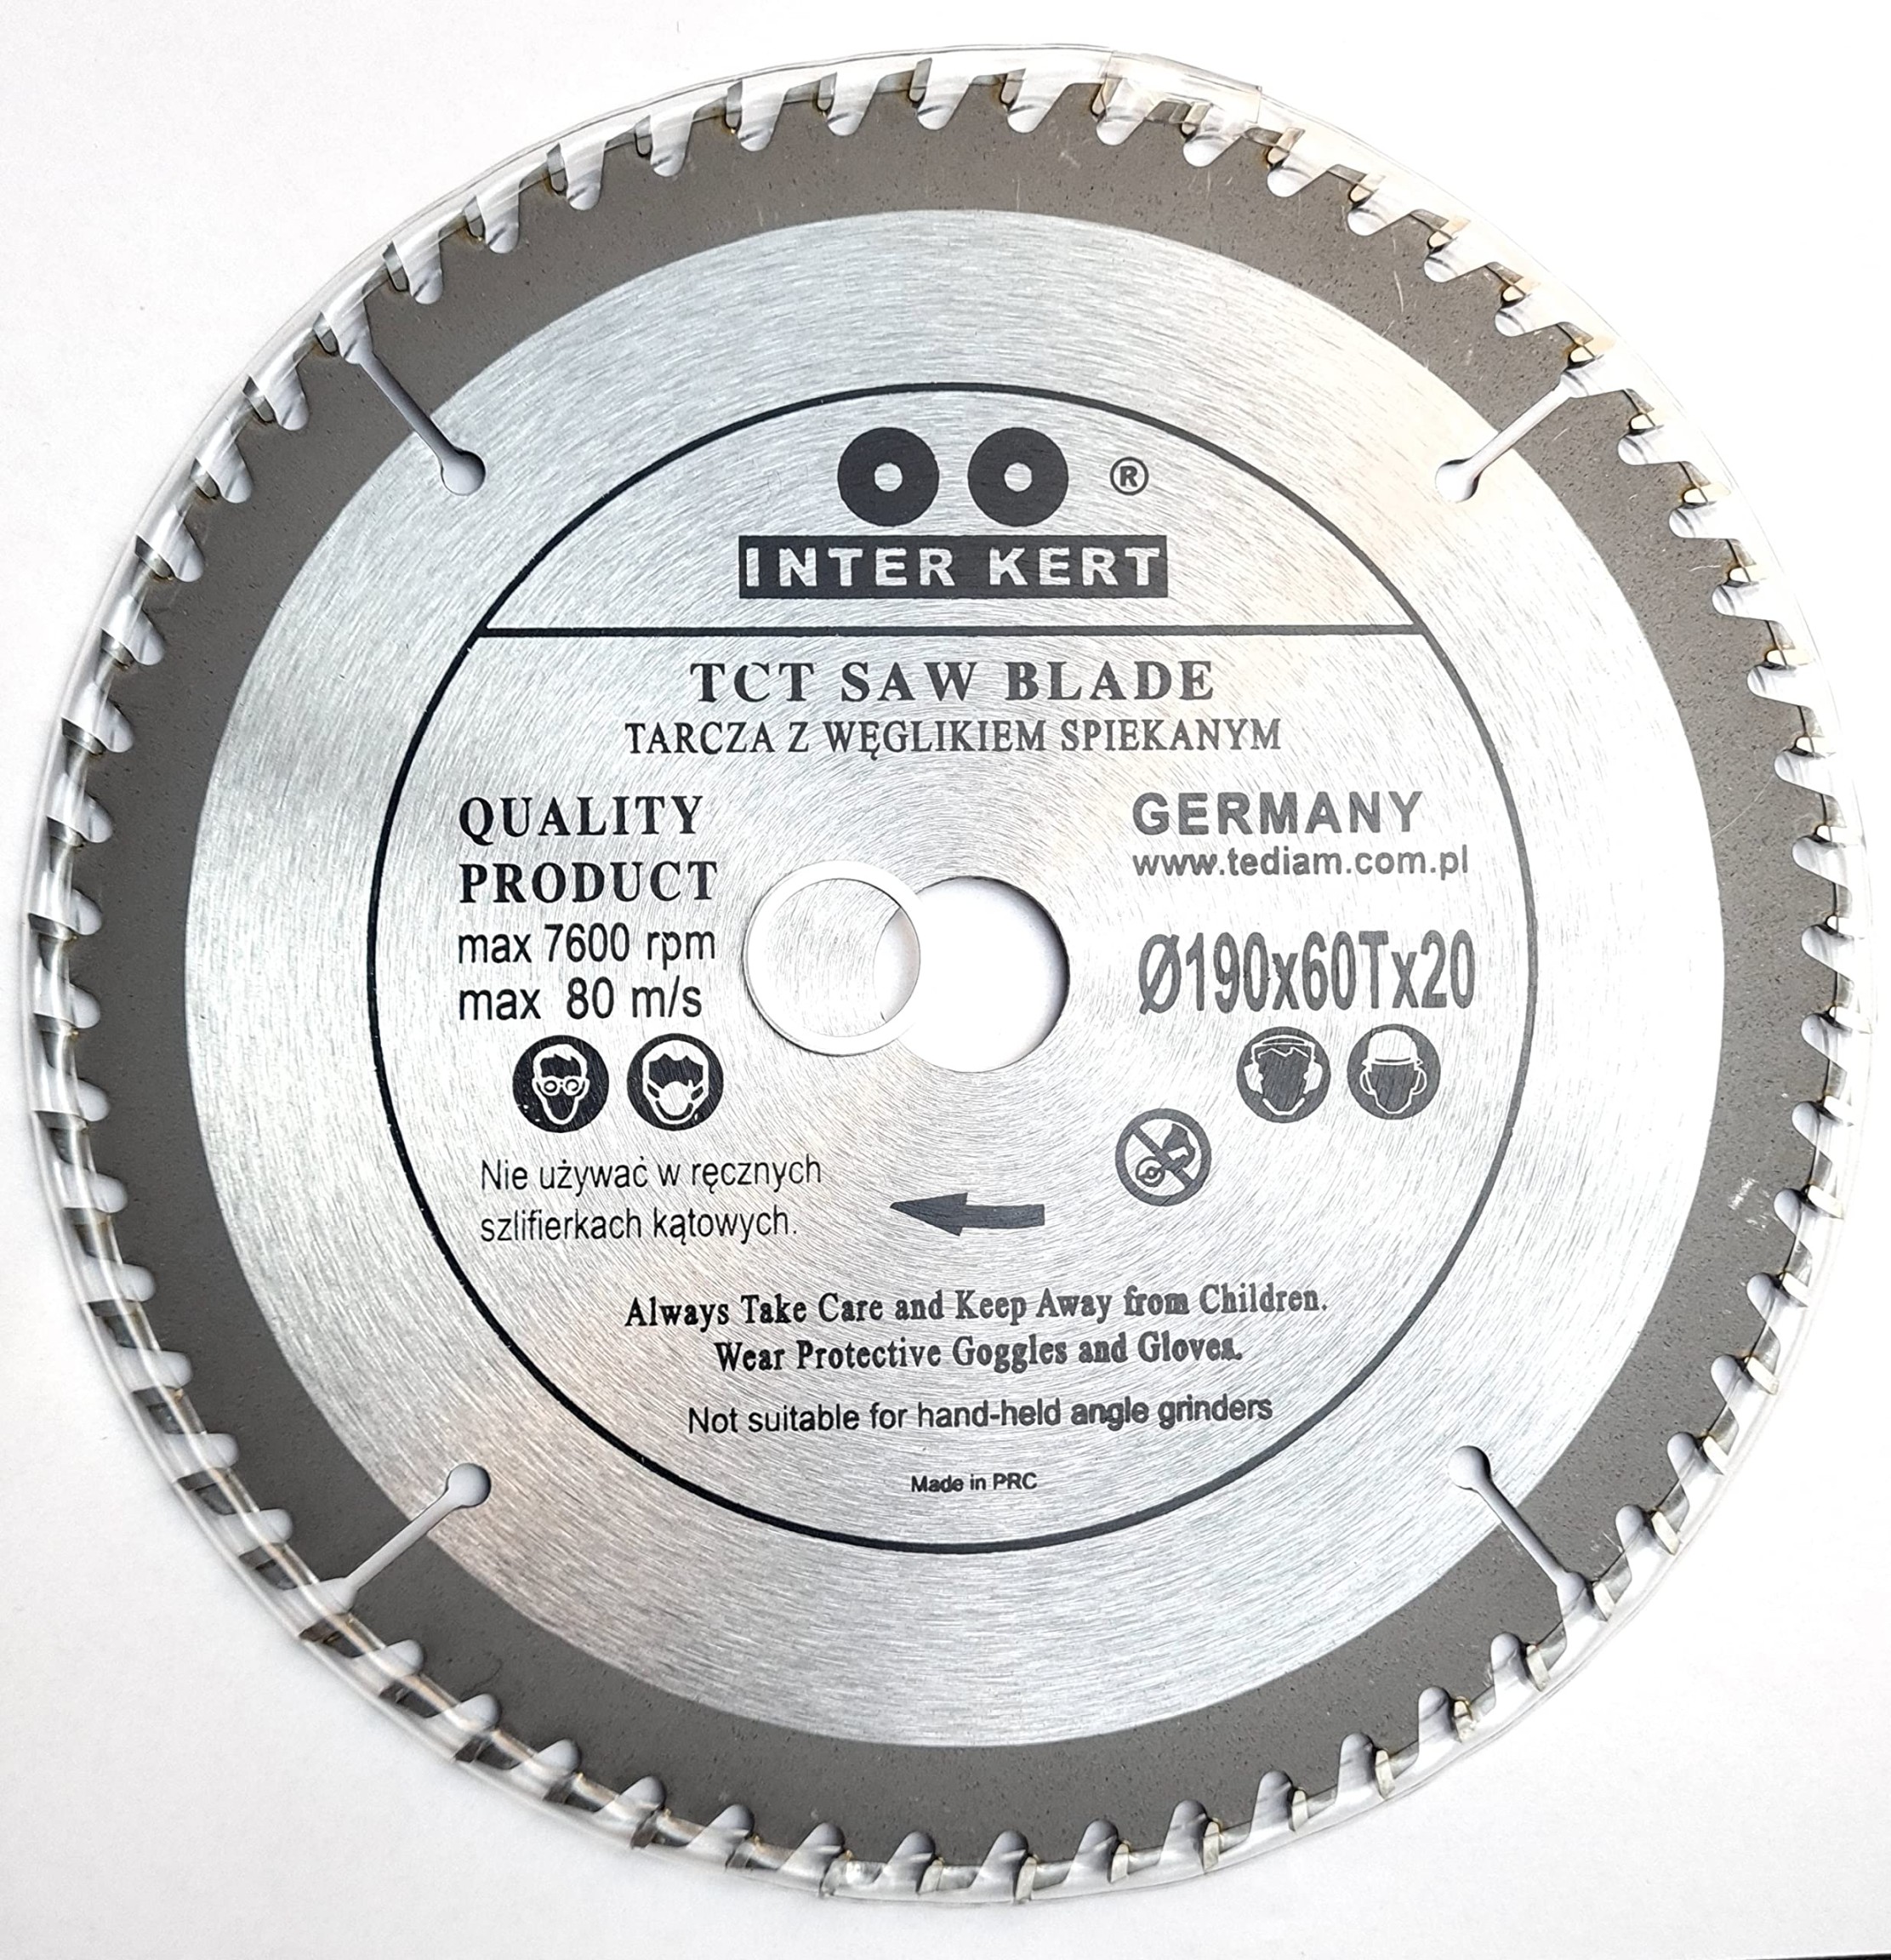 x-mm-teeth-saw-blade-top-quality-circular-saw-blade-for Circular Saw Blade Review: Choosing the Right Blade for the Job picture